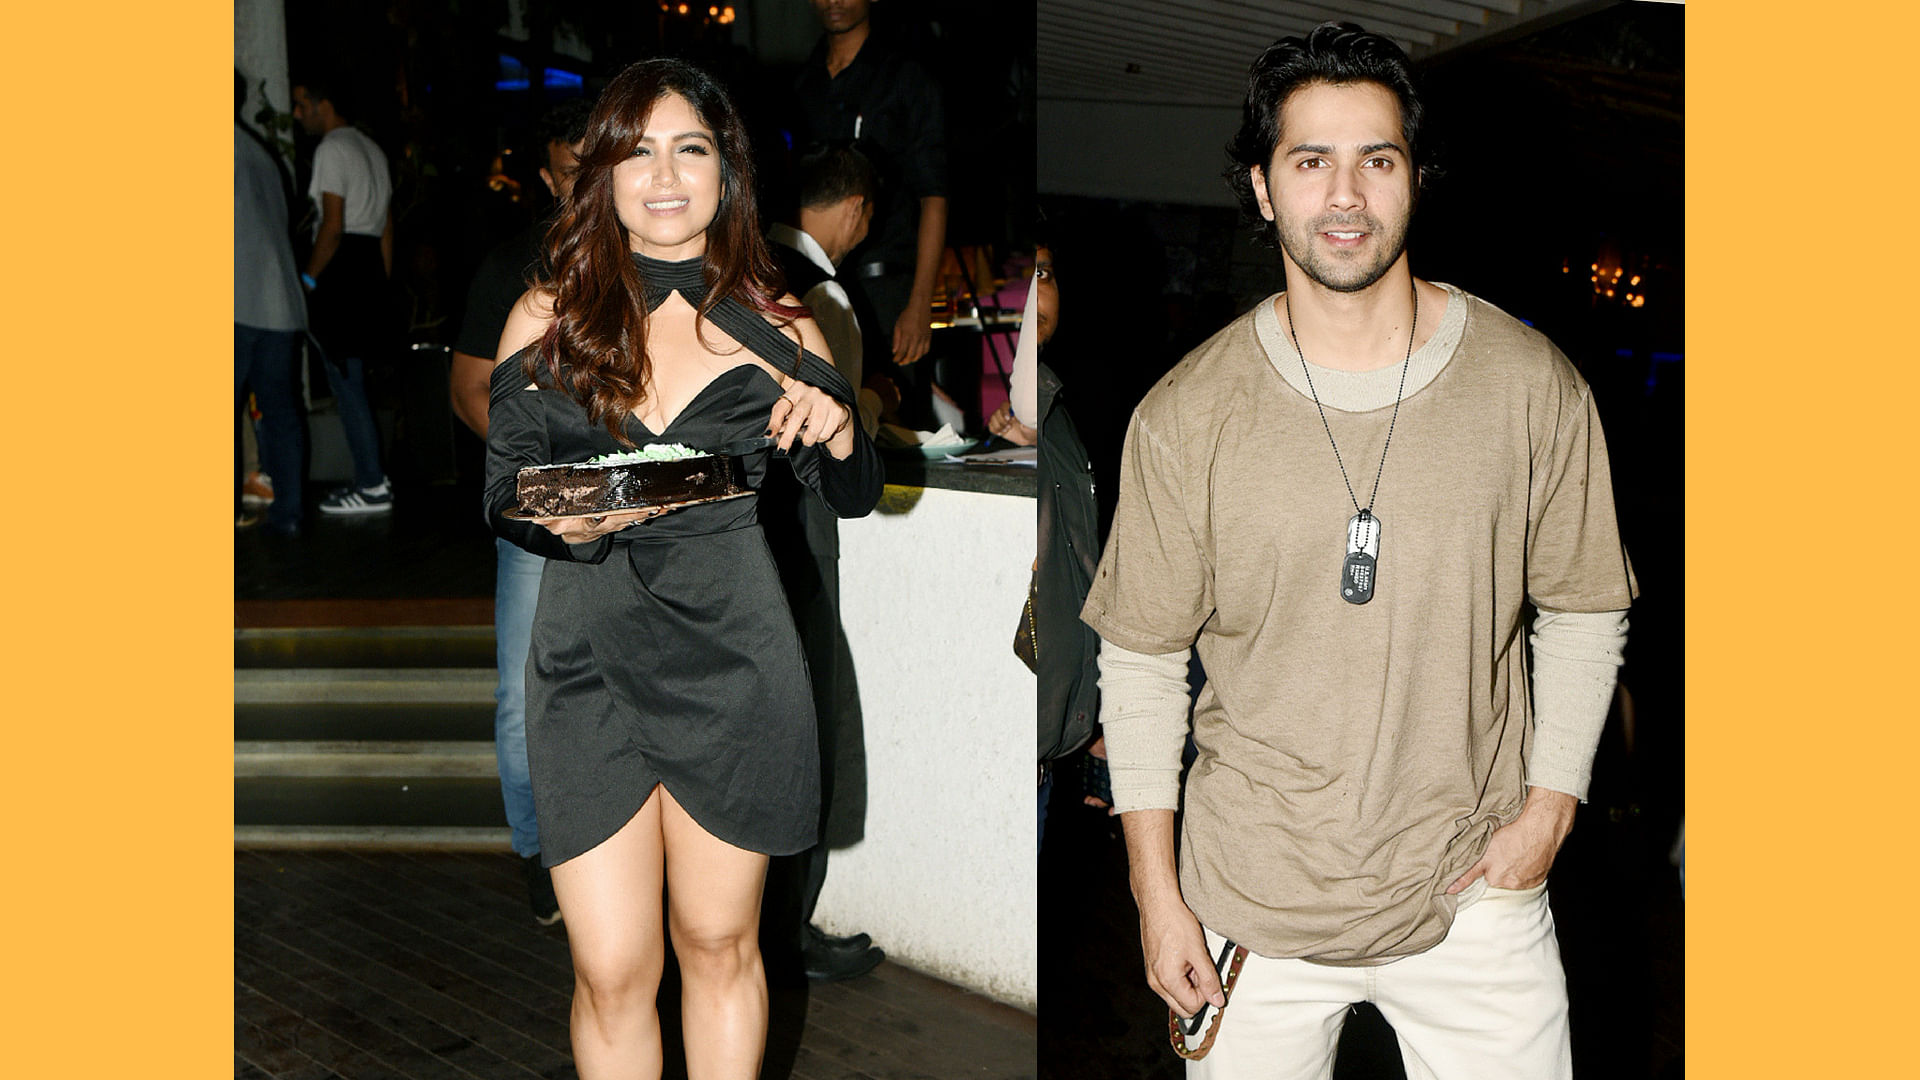 Bhumi Pednekar’s birthday party was attended by Varun Dhawan.